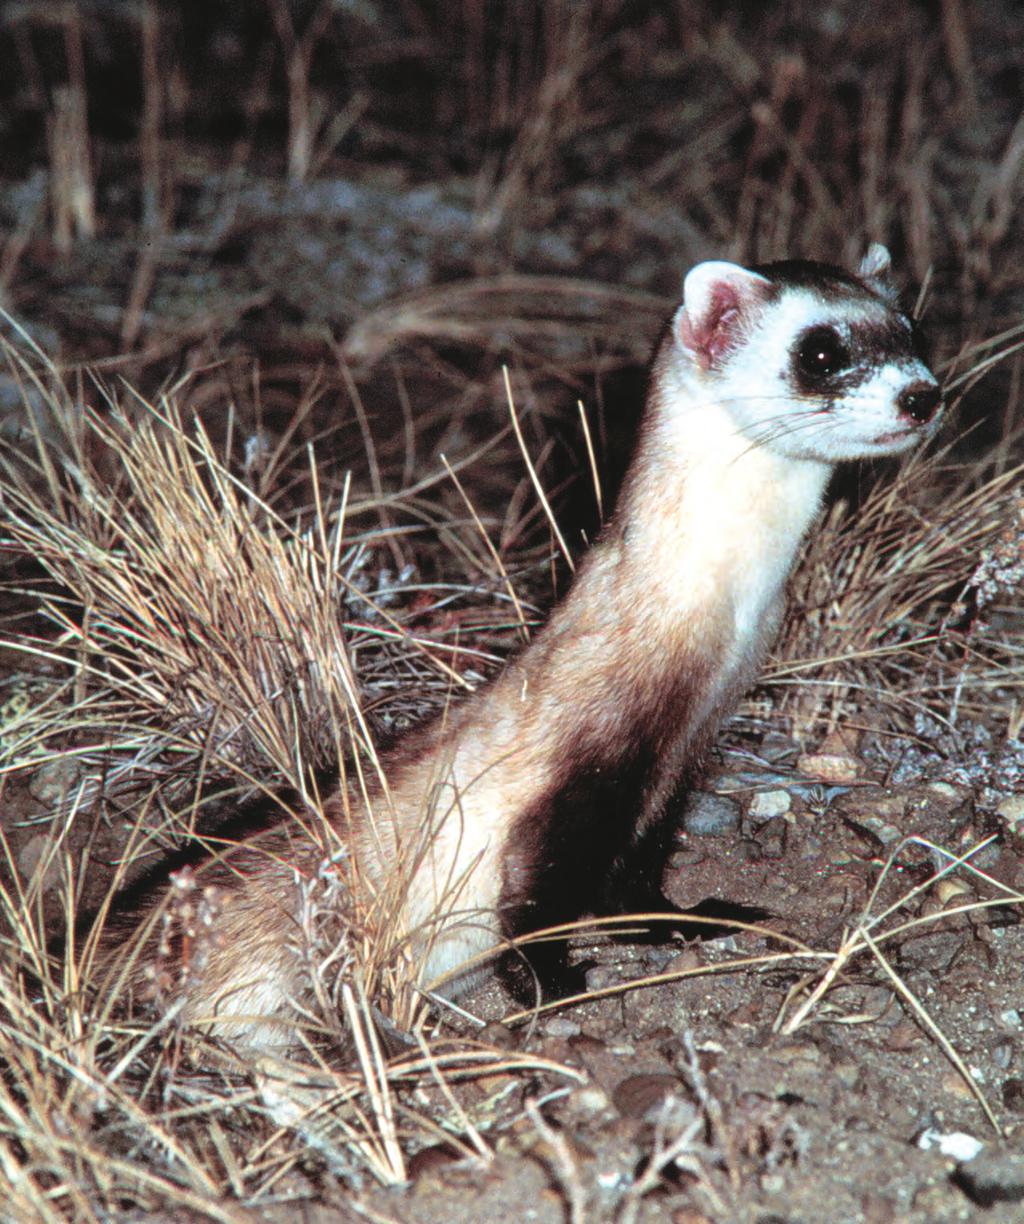 Recovery of the Black-footed Ferret: Progress and Continuing Challenges Proceedings of the Symposium on the Status of the Black-footed Ferret and Its